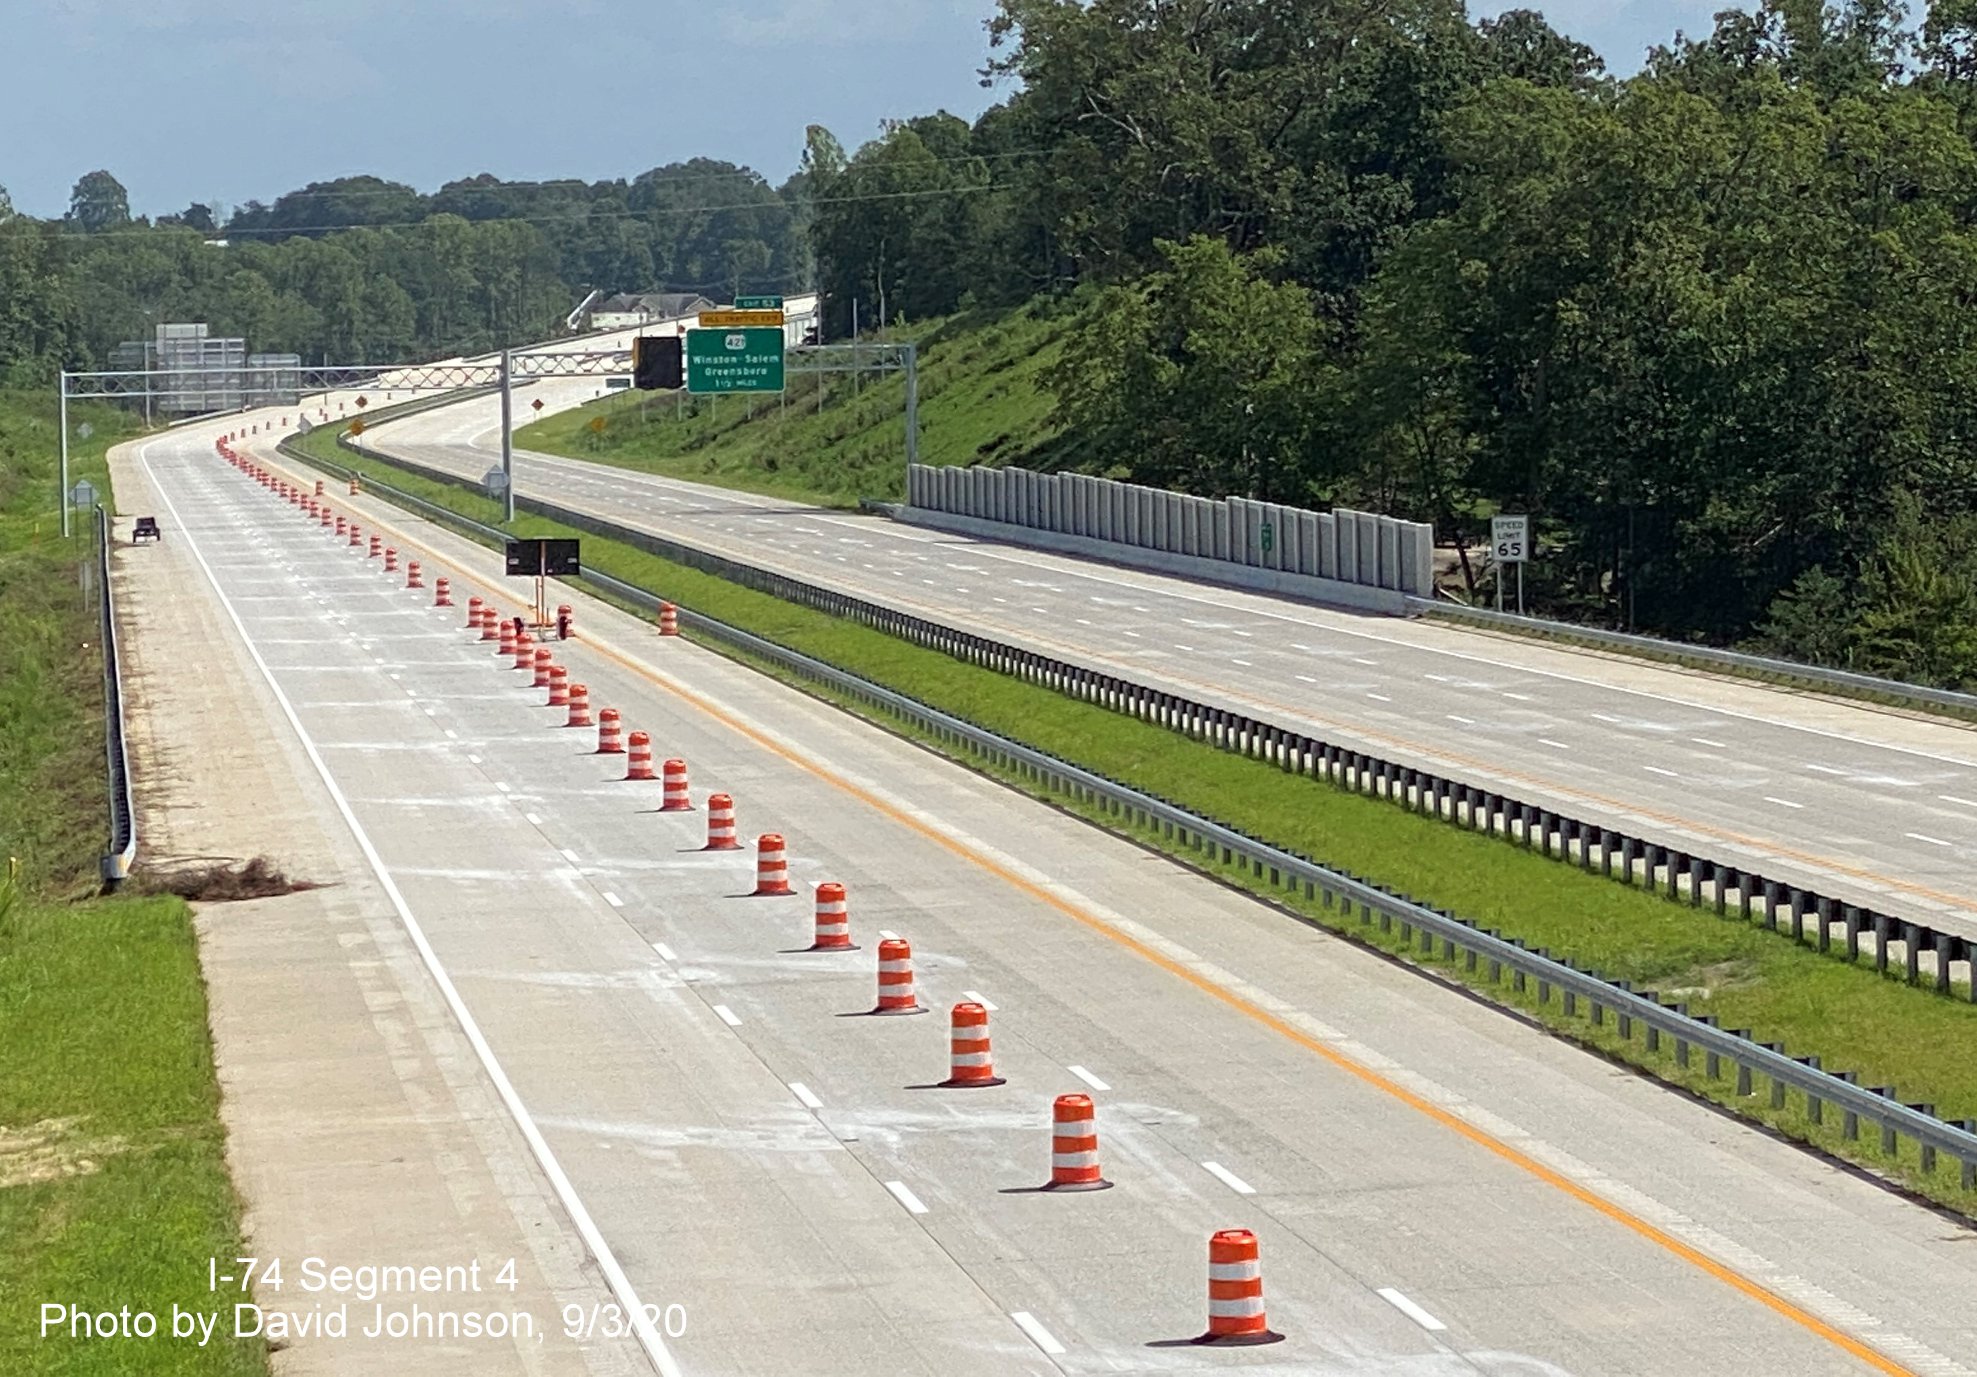 Image looking west along soon to be opened section of NC 74 Winston Salem Northern Beltway toward 
        US 421/Salem Parkway, by David Johnson September 2020